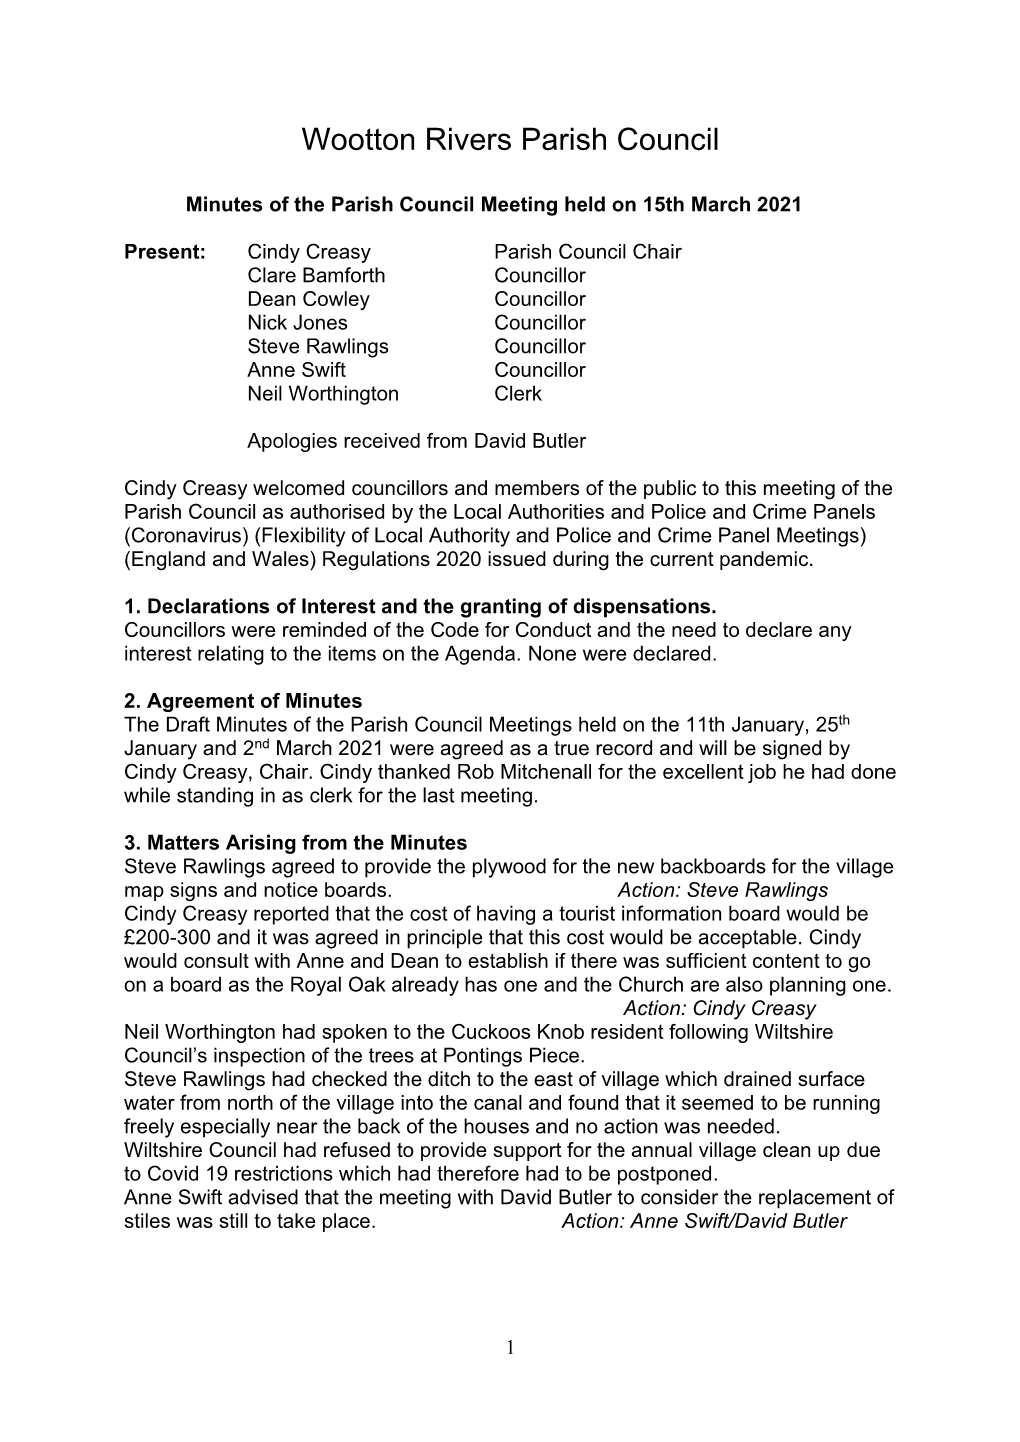 Minutes of the Parish Council Meeting Held on 15Th March 2021